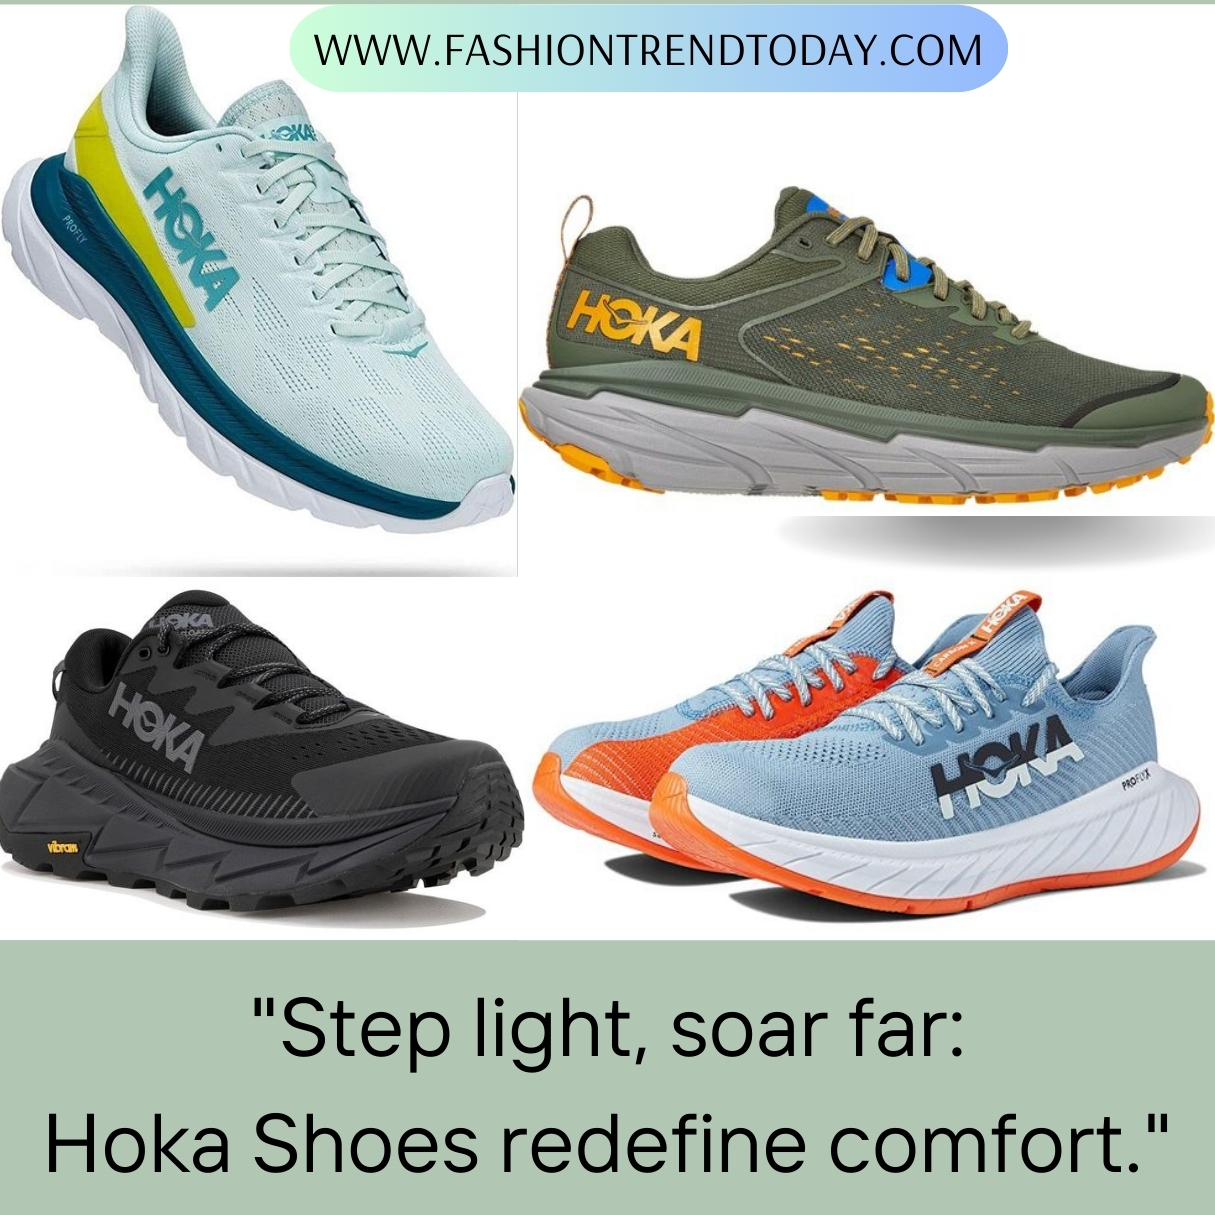 Hoka Shoes: Your Journey Starts Here